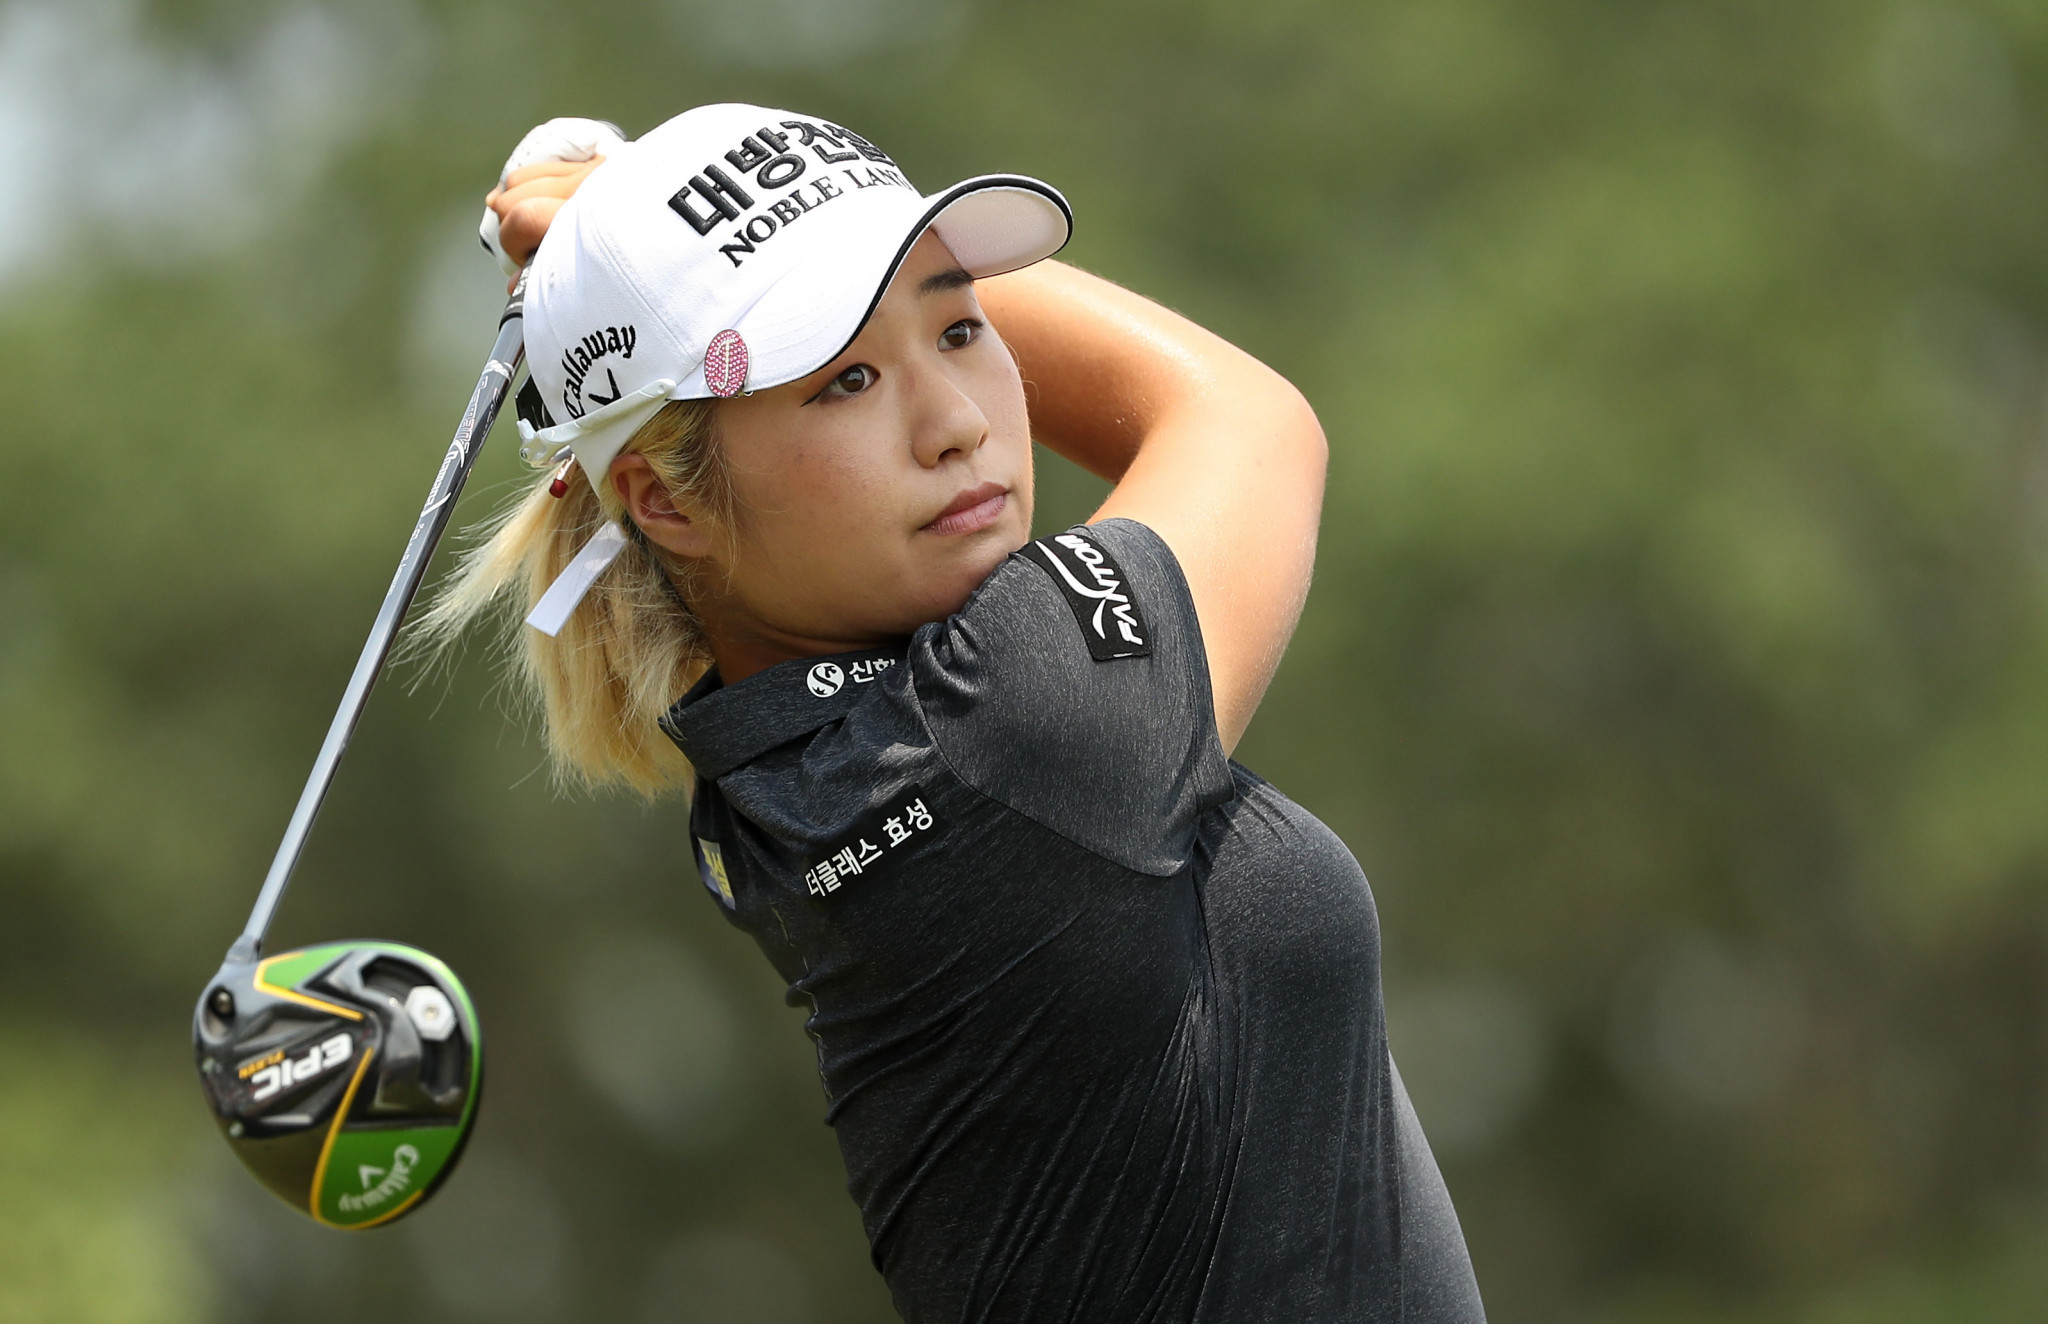 Jeongeun Lee6 - so named because she was the sixth player with her name on the LPGA Korean - shot a one-under 70 to finish the weekend with an appropriate six-under par ©Getty Images